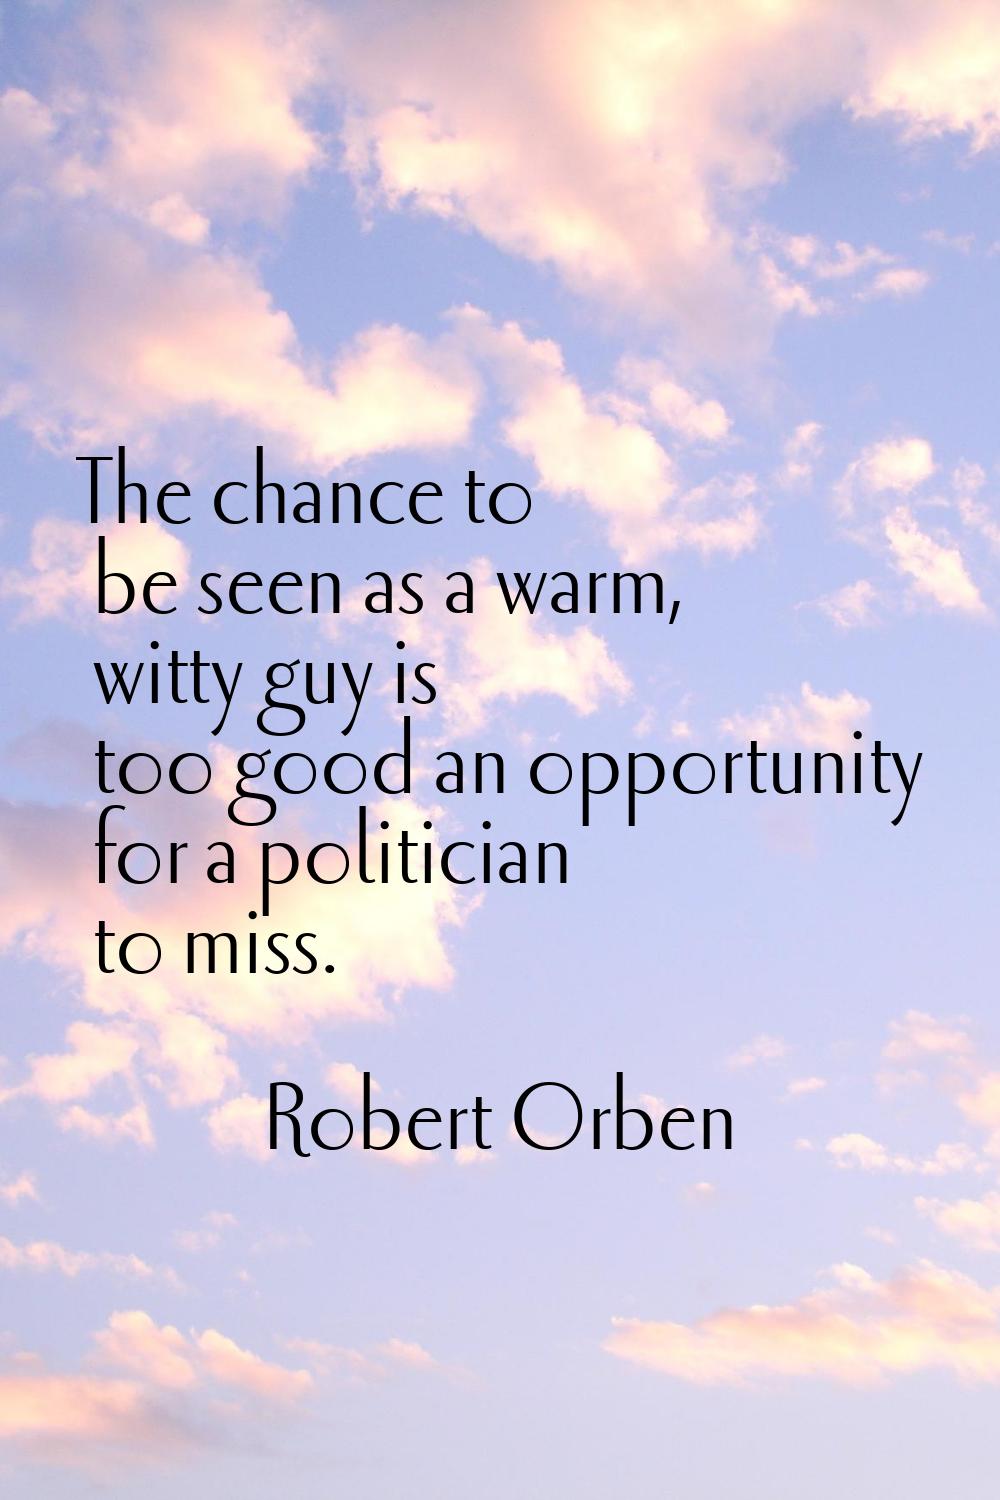 The chance to be seen as a warm, witty guy is too good an opportunity for a politician to miss.